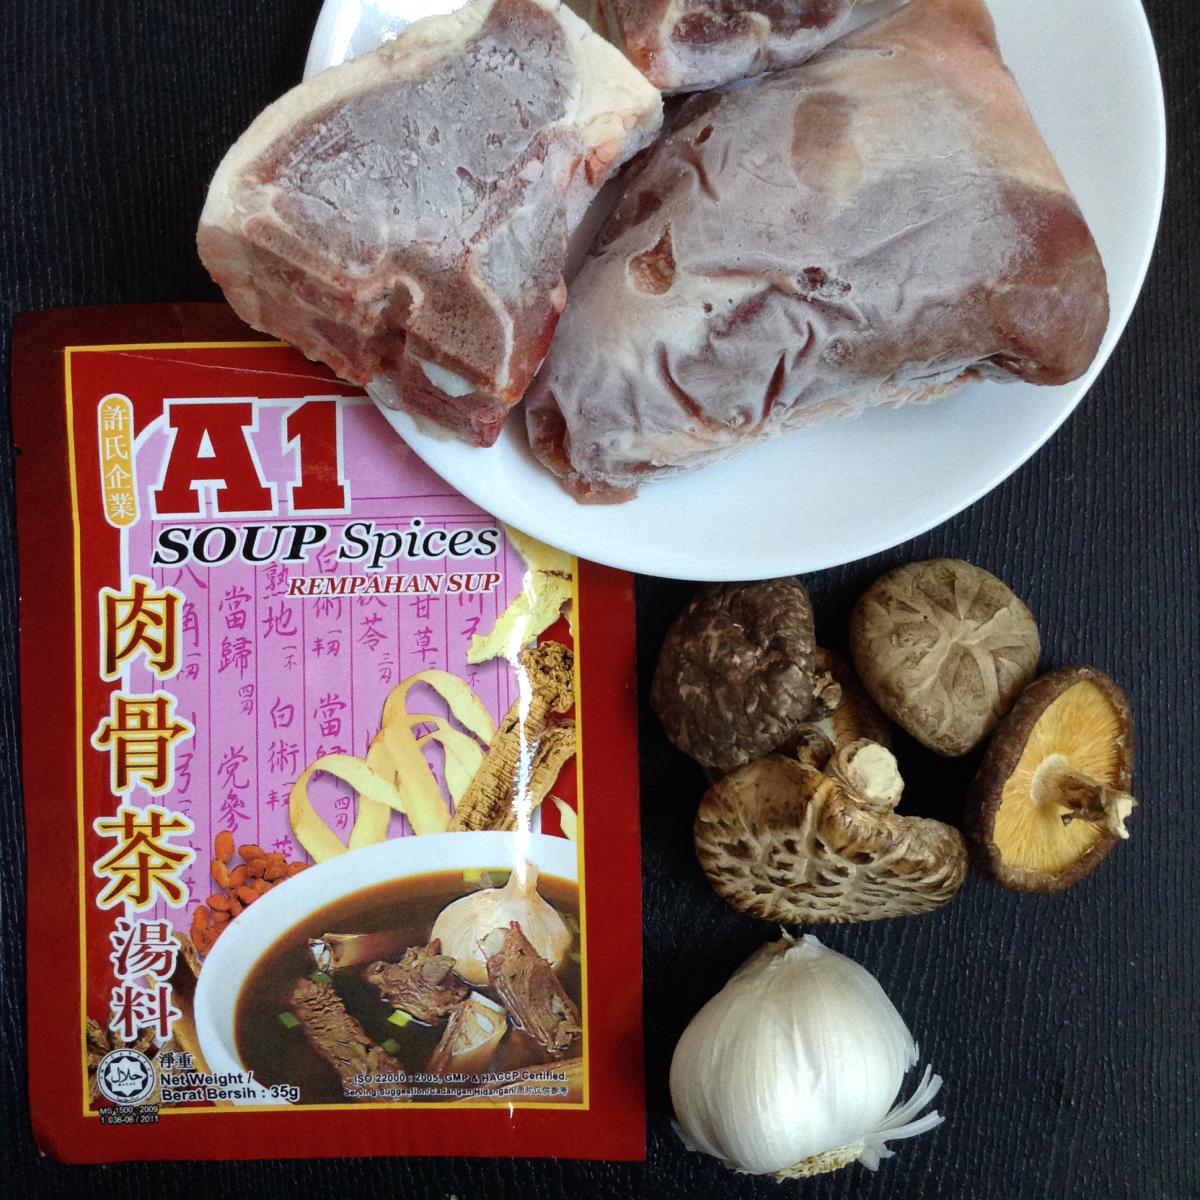 Pressure cooker Bak Kut Teh Herbal Rib Soup, Healthy Eating at Home with CancerWife